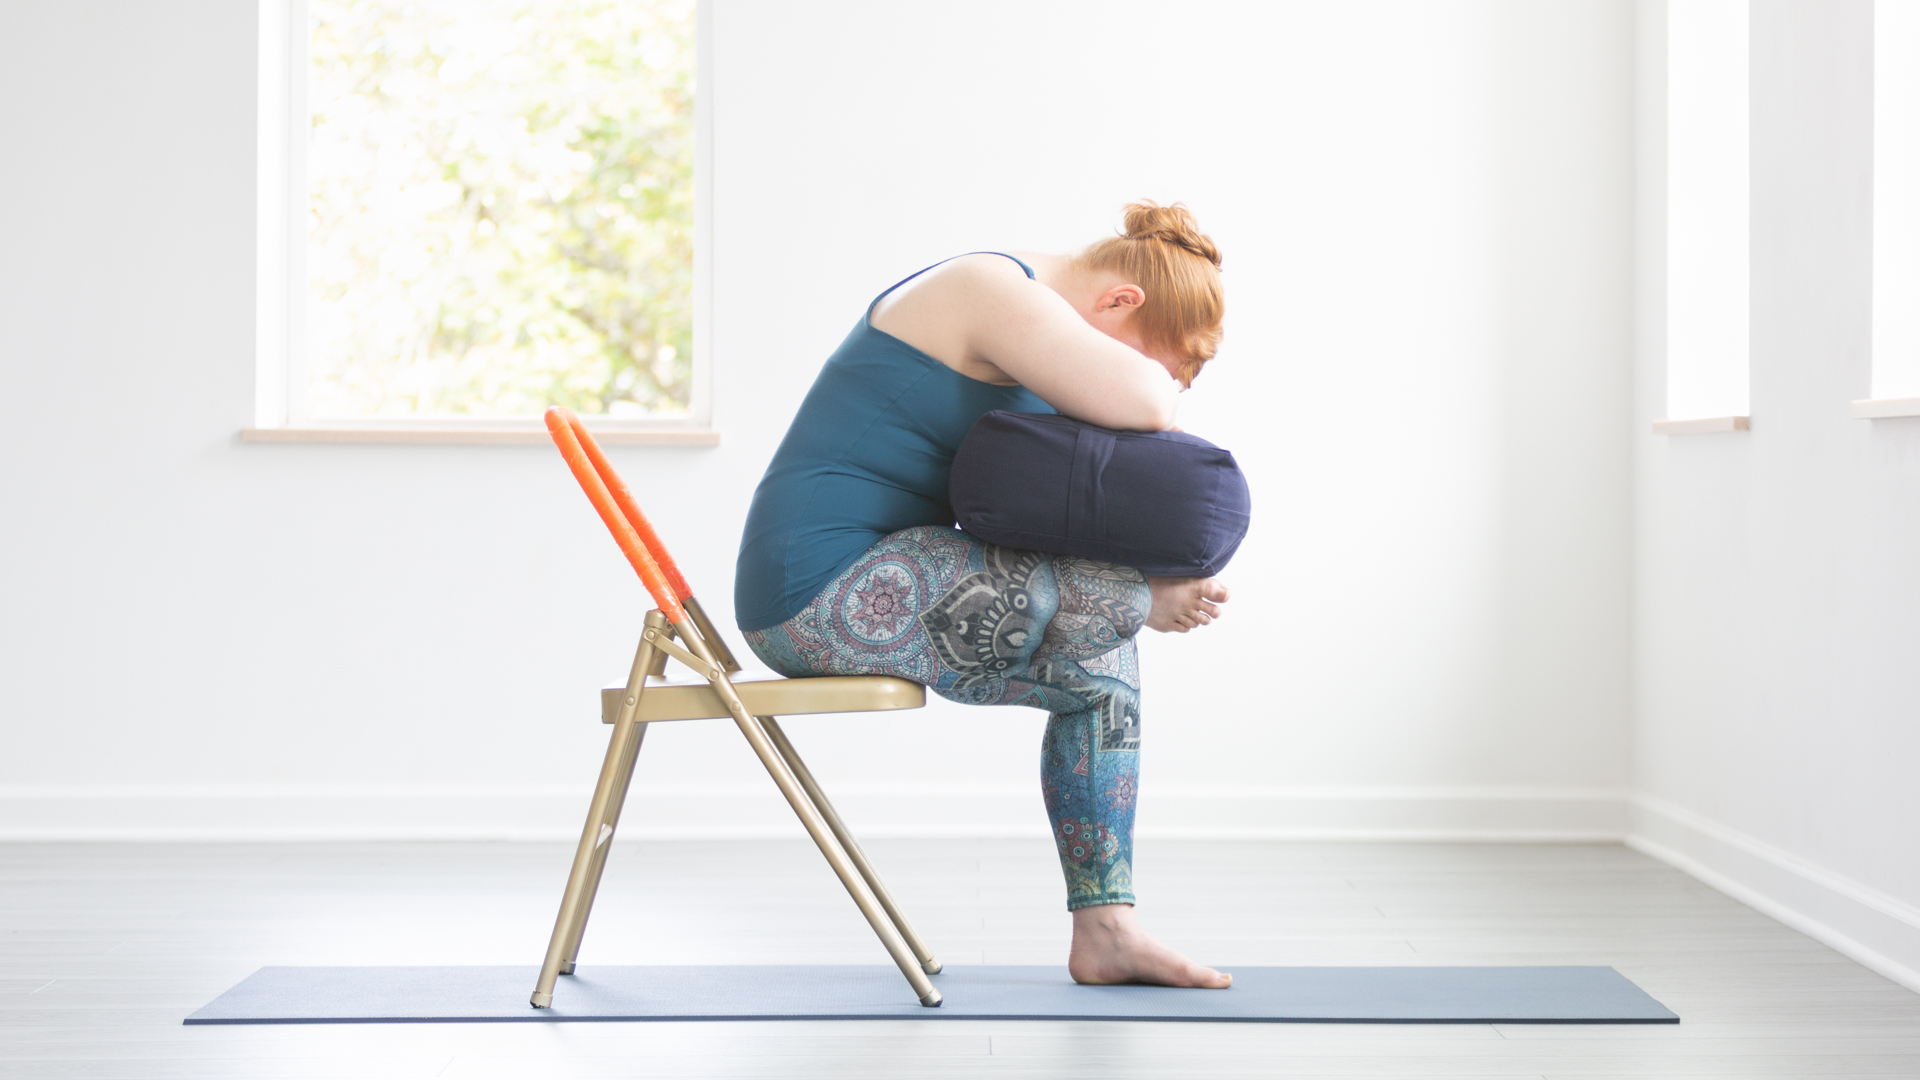 Release Stress Right at Your Desk With 5 Chair Yoga Moves | SparkPeople